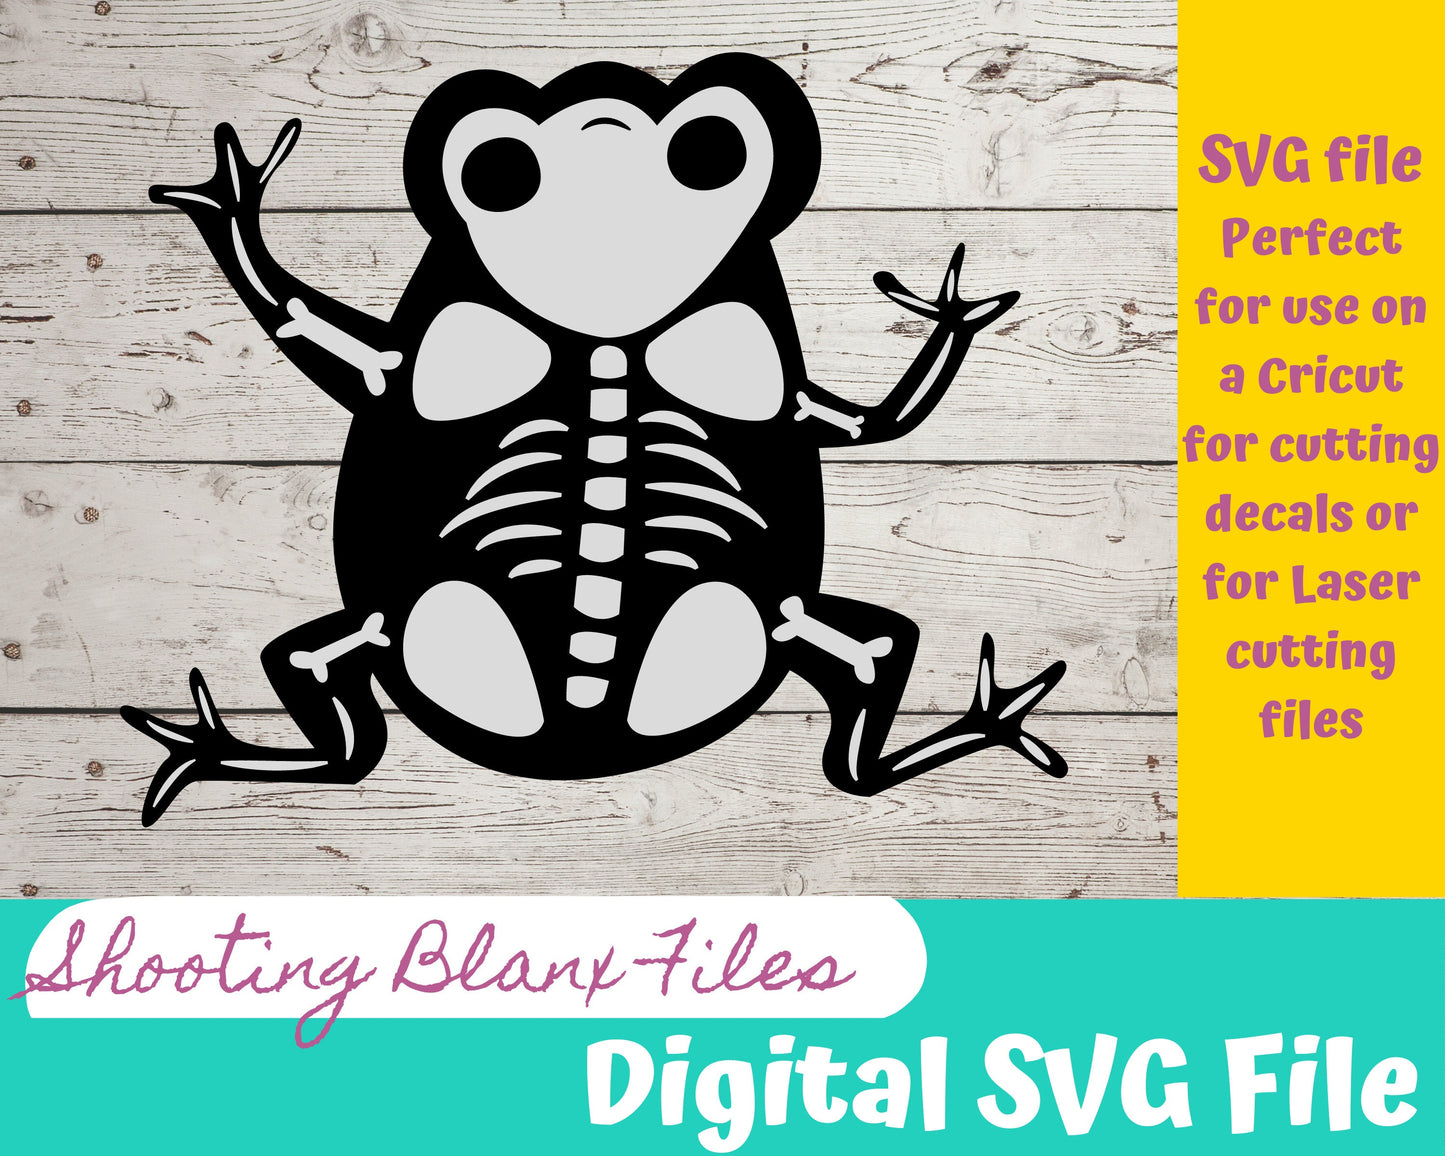 Frog Skeleton SVG file perfect for Cricut, Cameo, or Silhouette also for laser engraving Glowforge, Scary, Halloween, animal